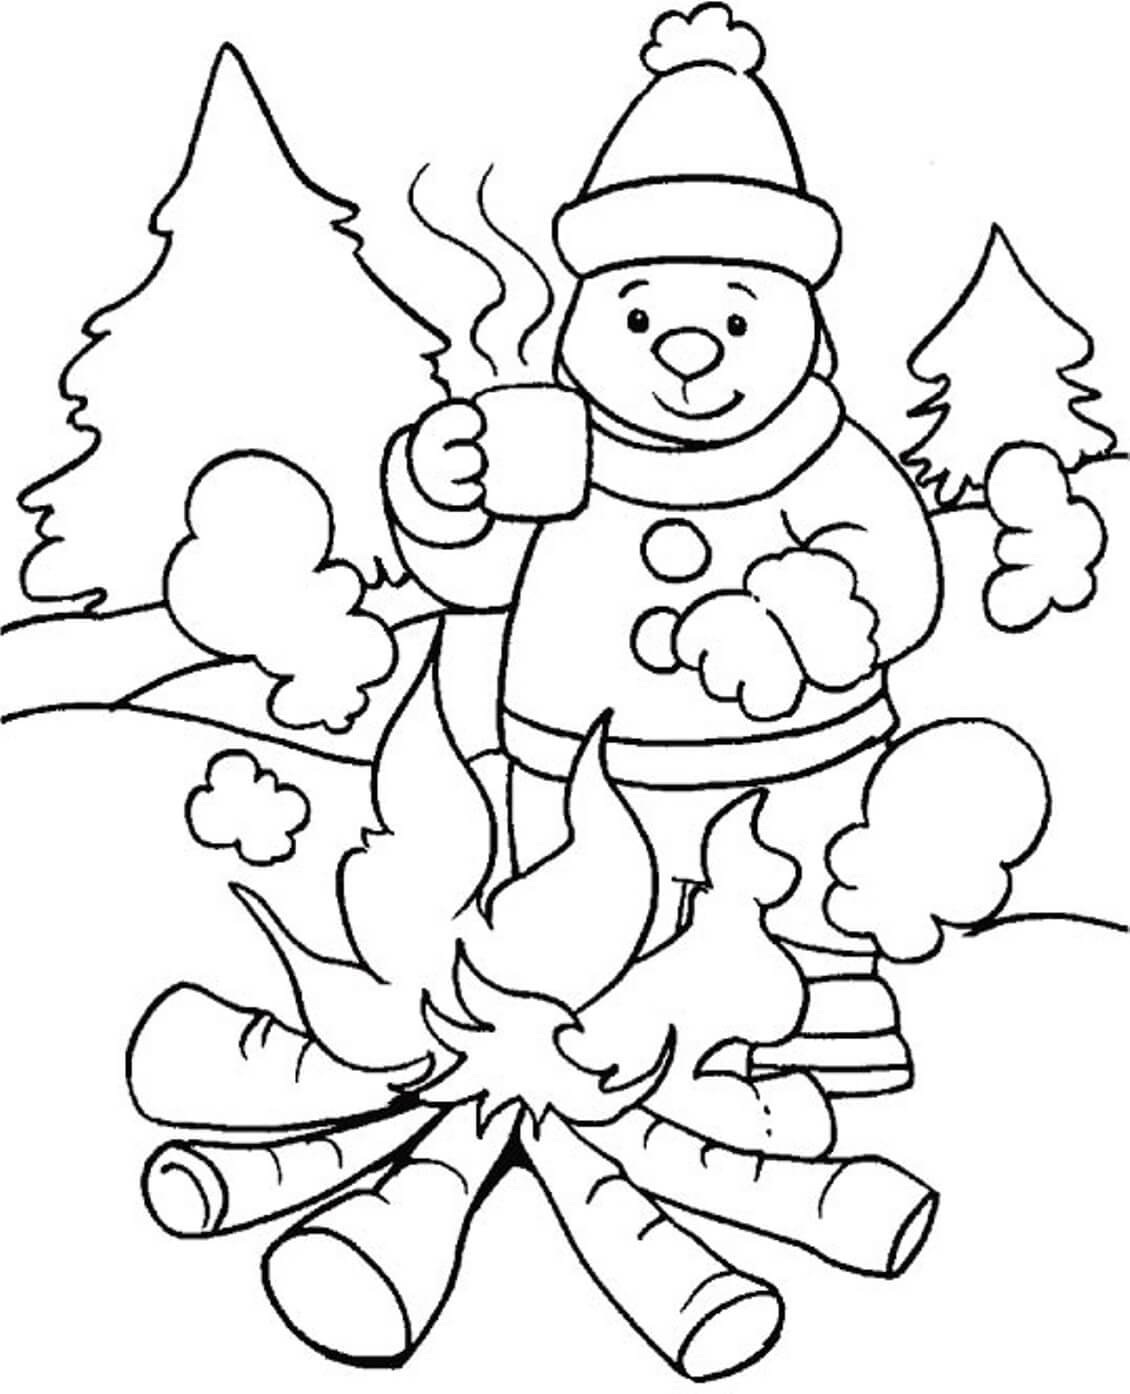 winter-printable-coloring-pages